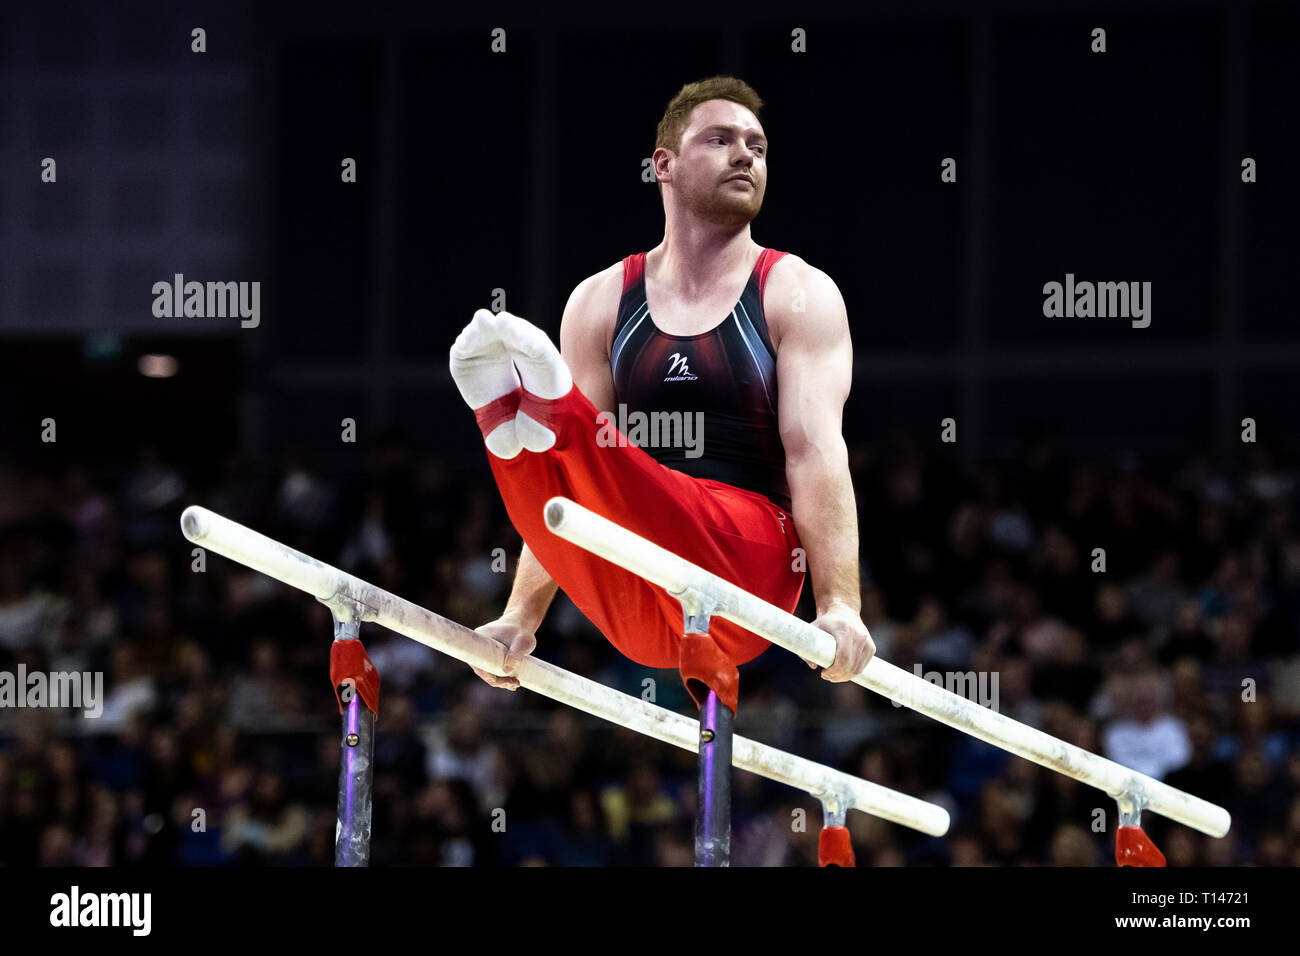 London, UK. 23rd March, 2019. Daniel Purvis performs on the Parallel Bars during the Matchroom Multisport presents the 2019 Superstars of Gymnastics at The O2 Arena on Saturday, 23 March 2019. LONDON ENGLAND. Credit: Taka G Wu/Alamy News Stock Photo